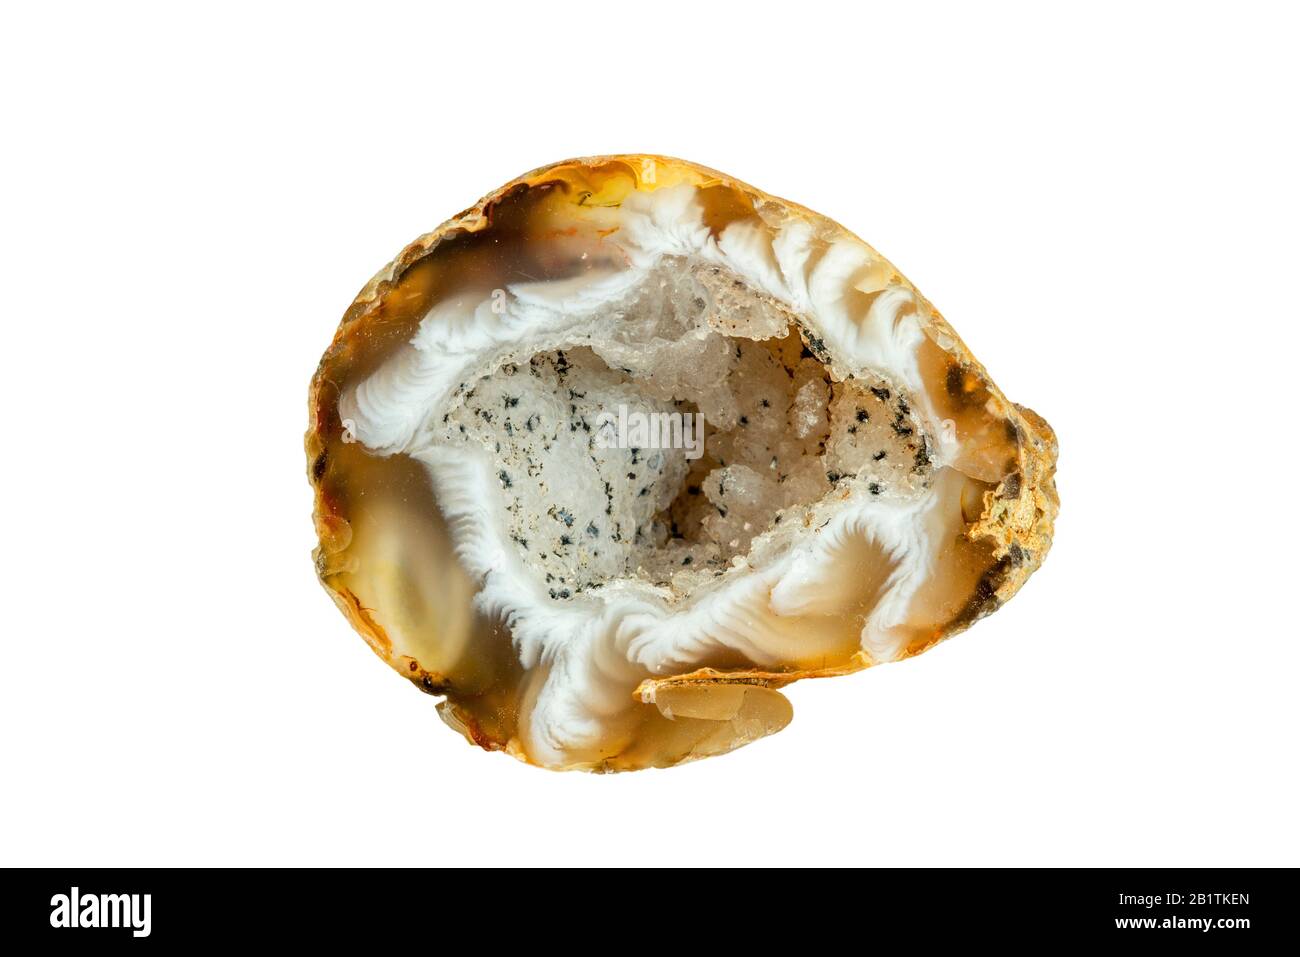 Geode, geological secondary formation within sedimentary and volcanic rock. Geodes are hollow, vaguely circular rocks showing minerals / crystals Stock Photo